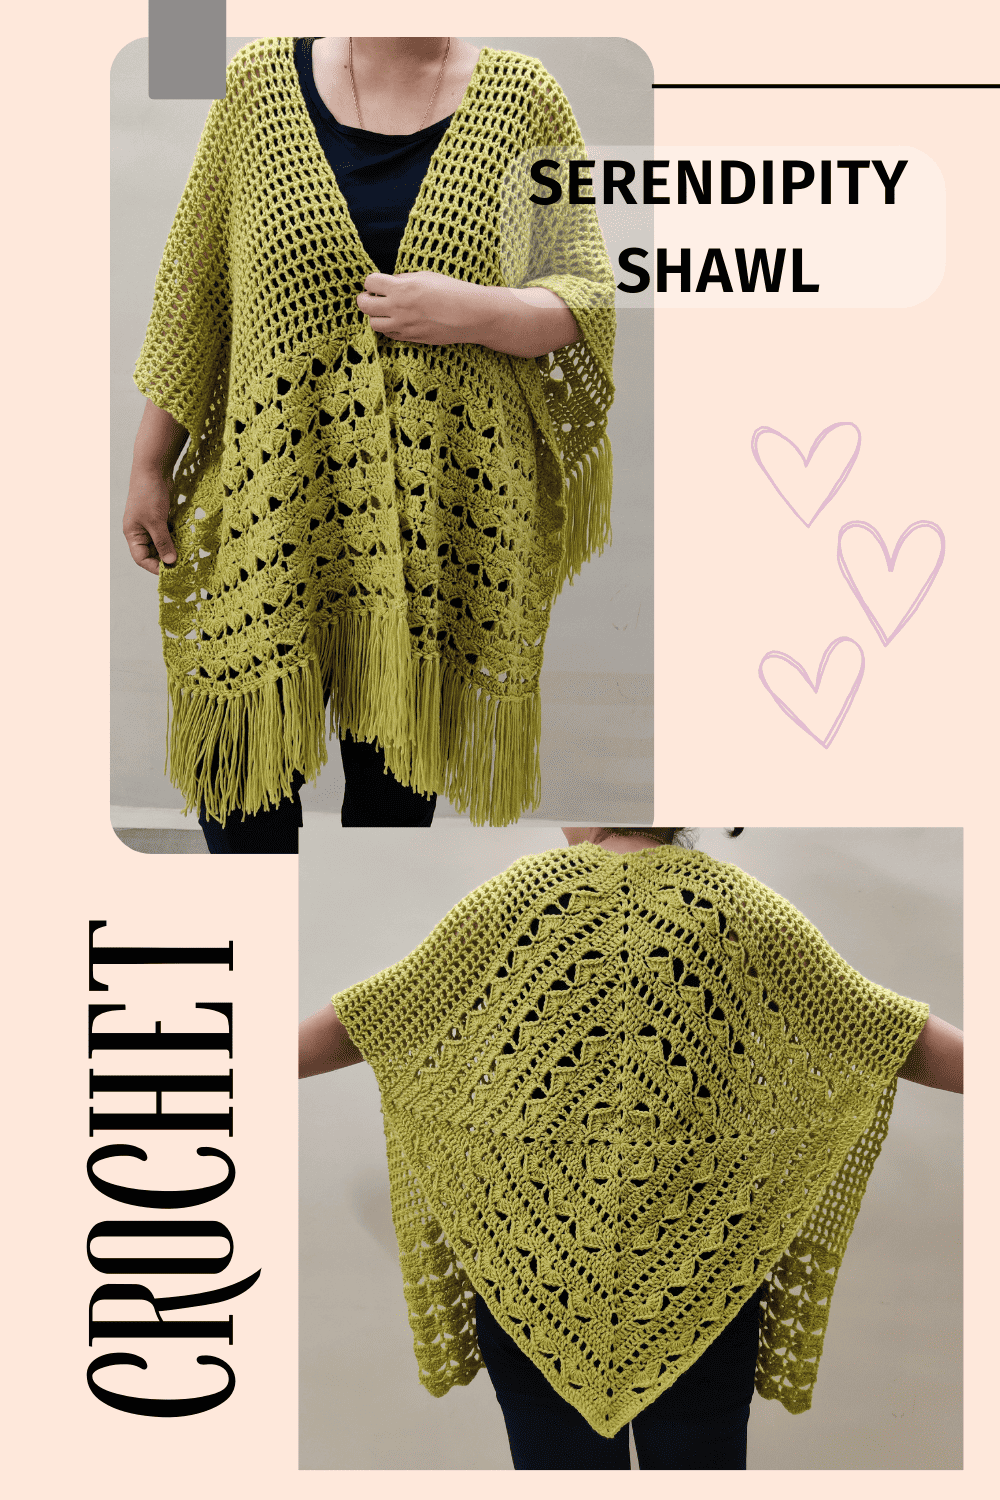 crochet shawl front view and back view. the shawl is pistachio shade with fringes and the back panel is diamond in shape